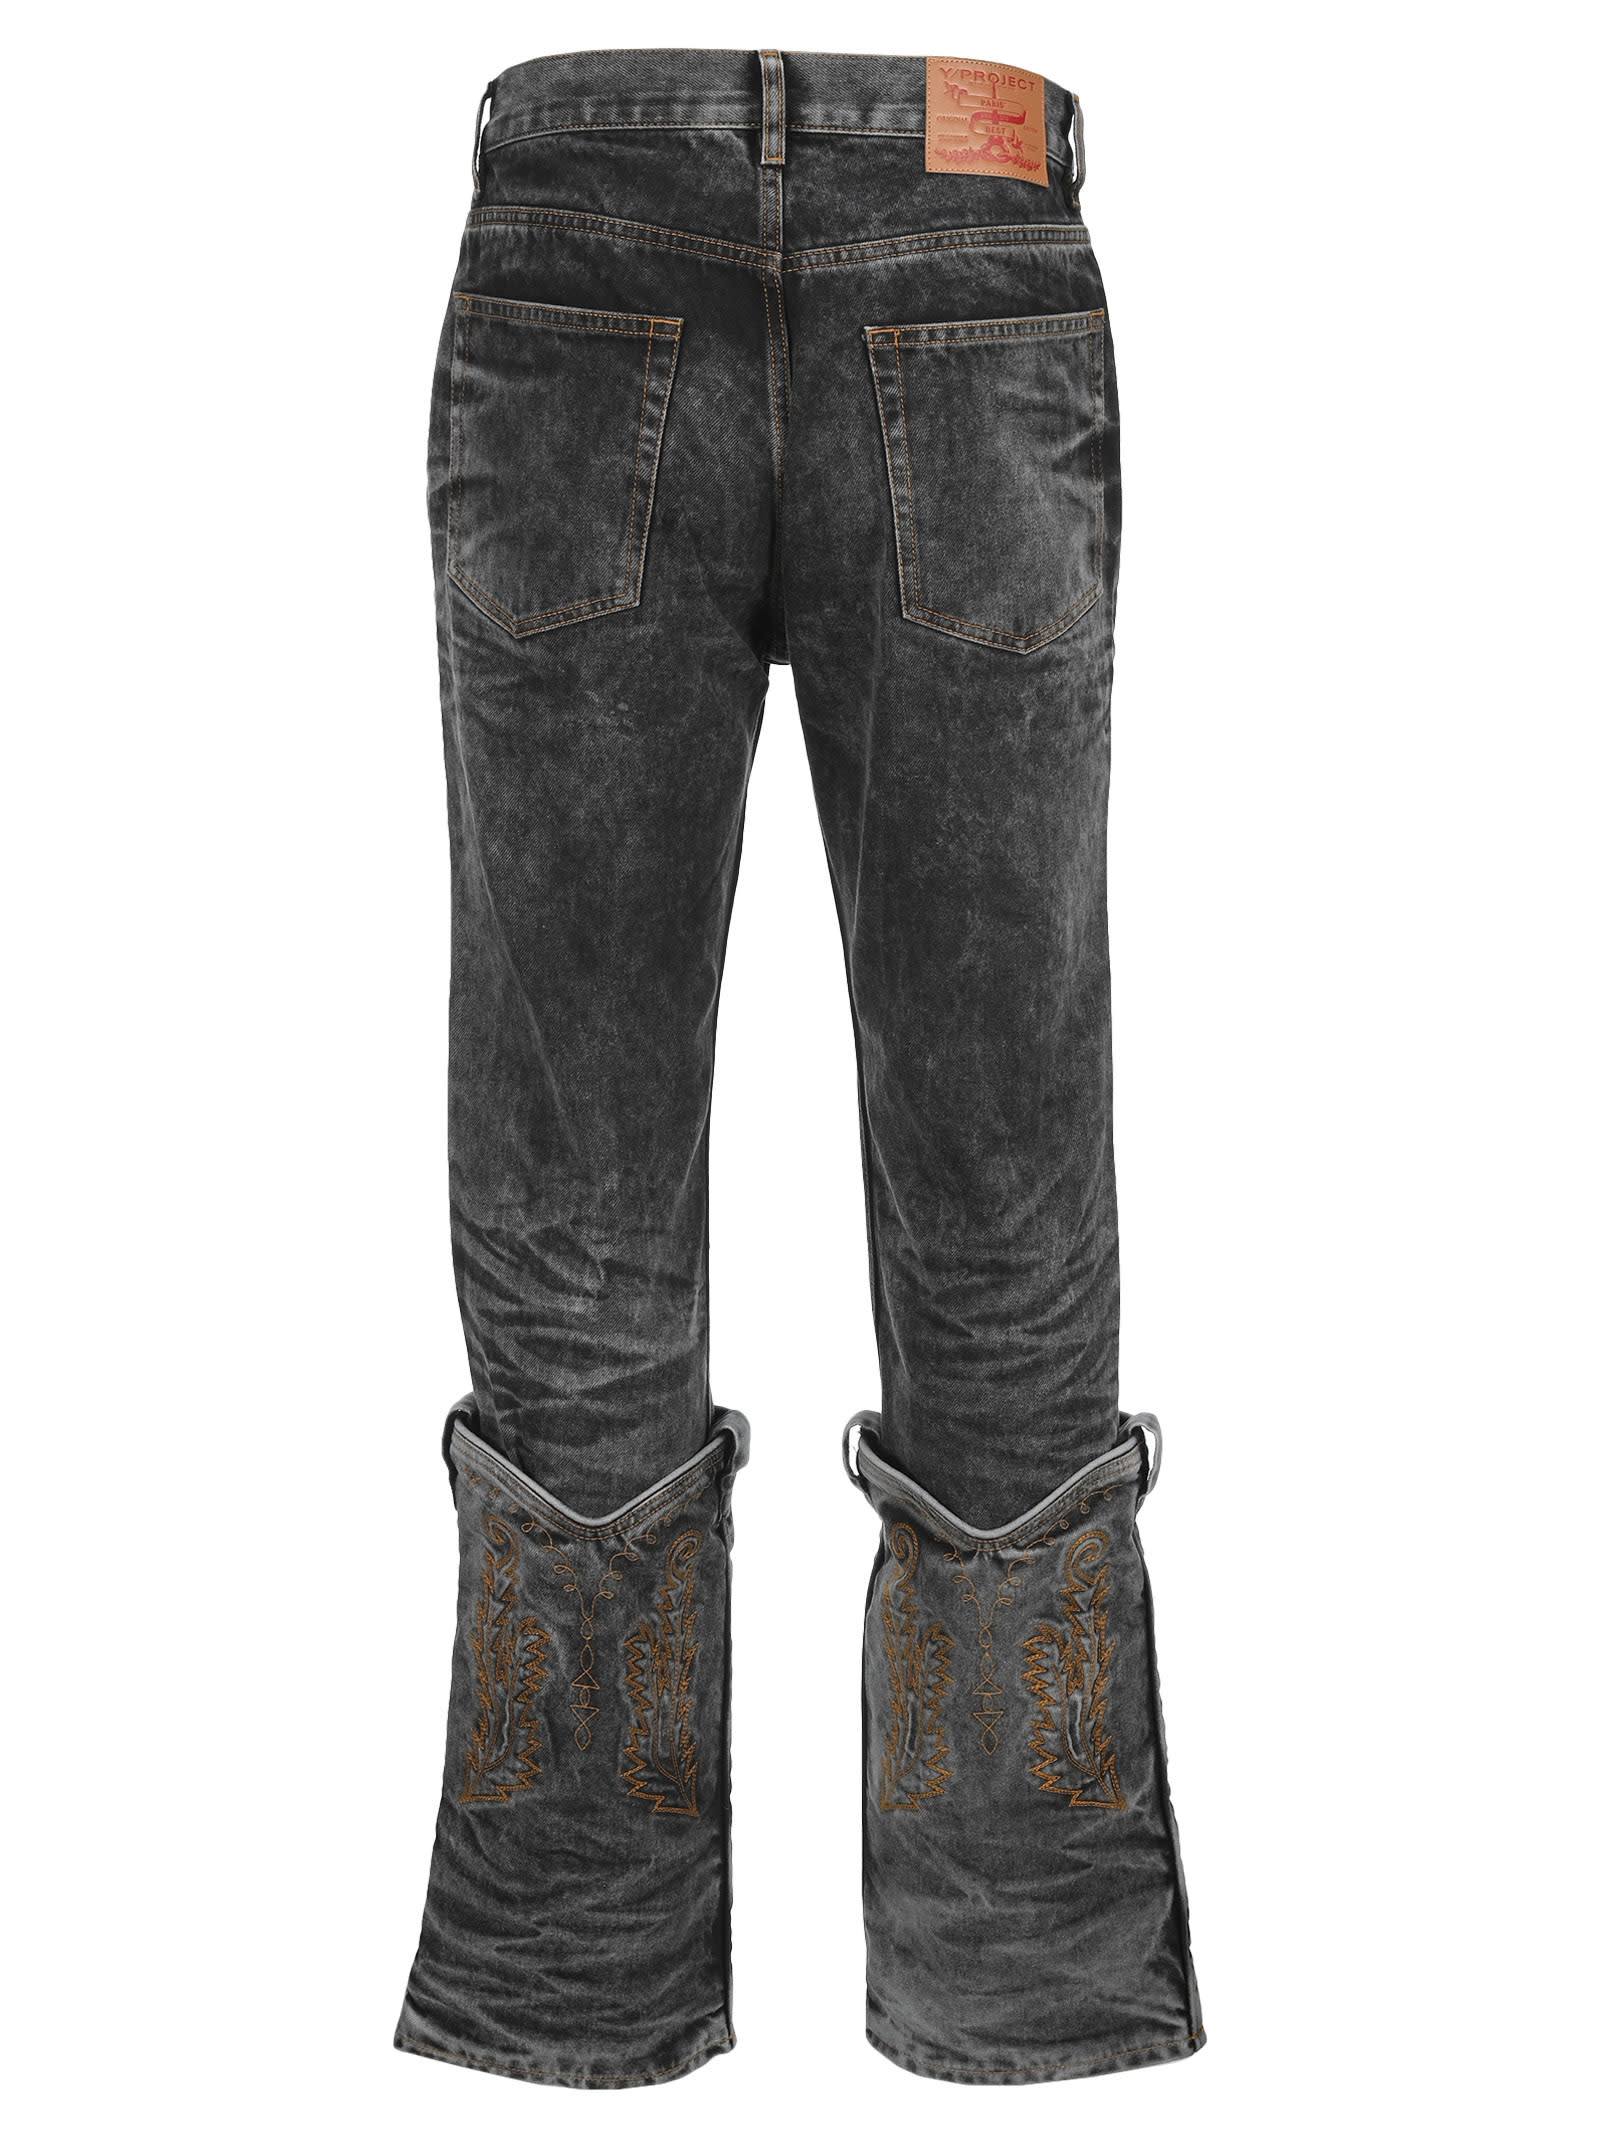 Y/project Cowboy Cuff Jeans | italist